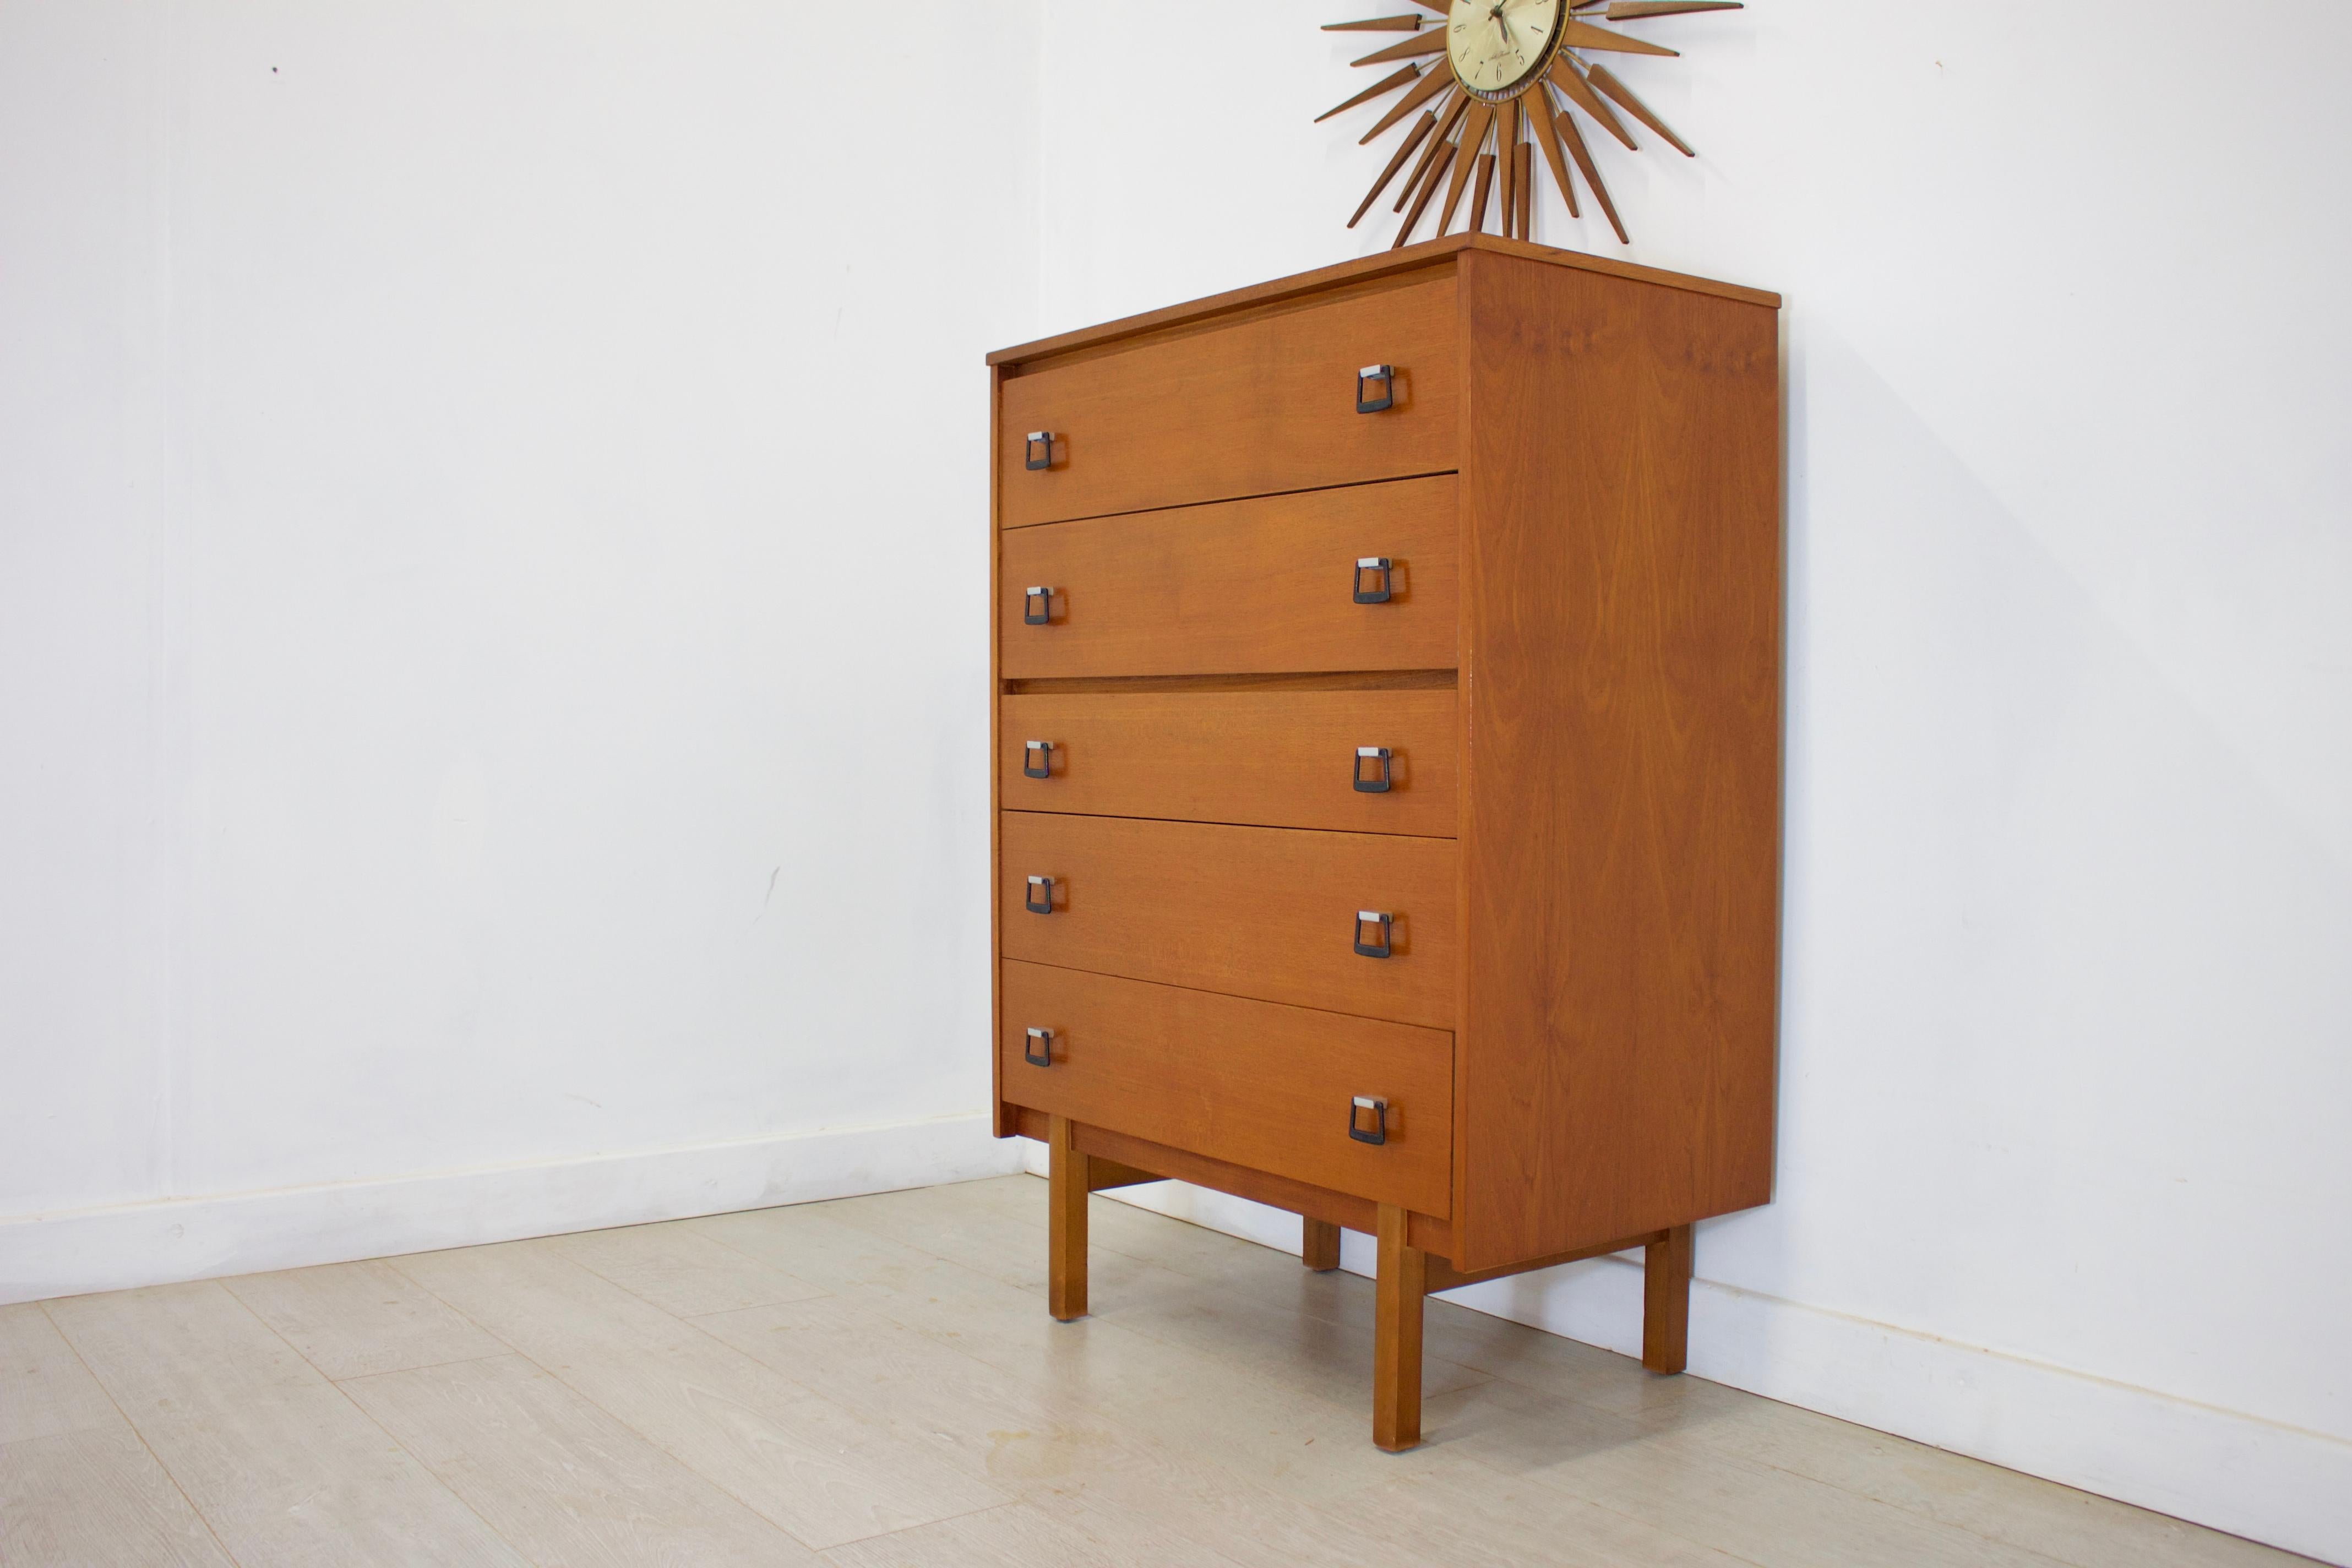 - Midcentury chest of drawers
- Manufactured in the UK by symbol
- Made from teak and teak veneer.